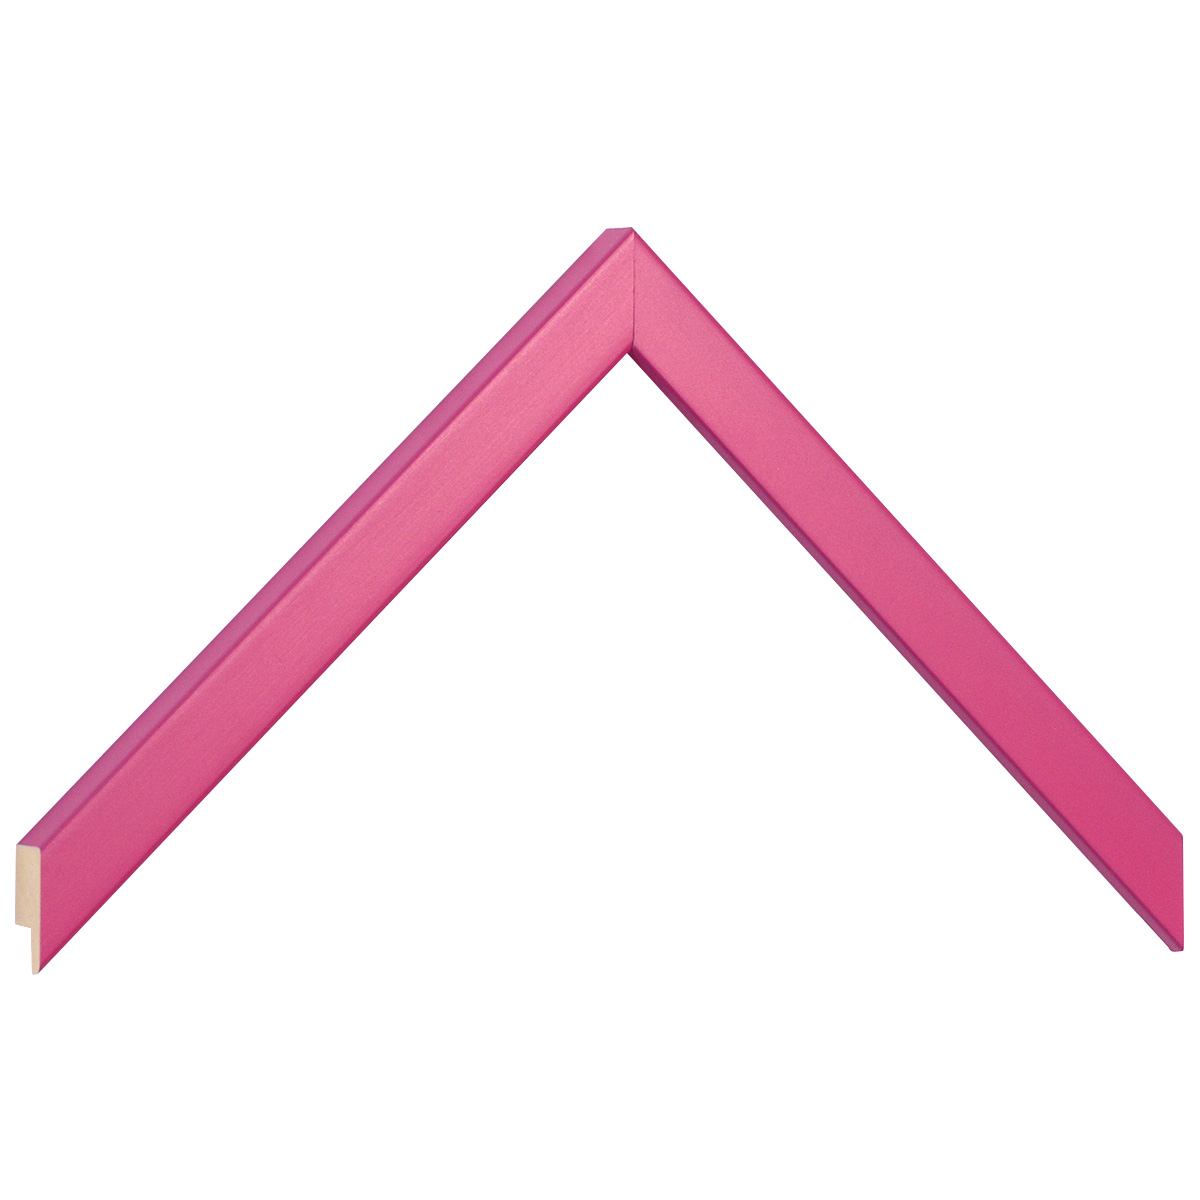 Moulding ayous width 15mm height 14 - fuchsia - Sample